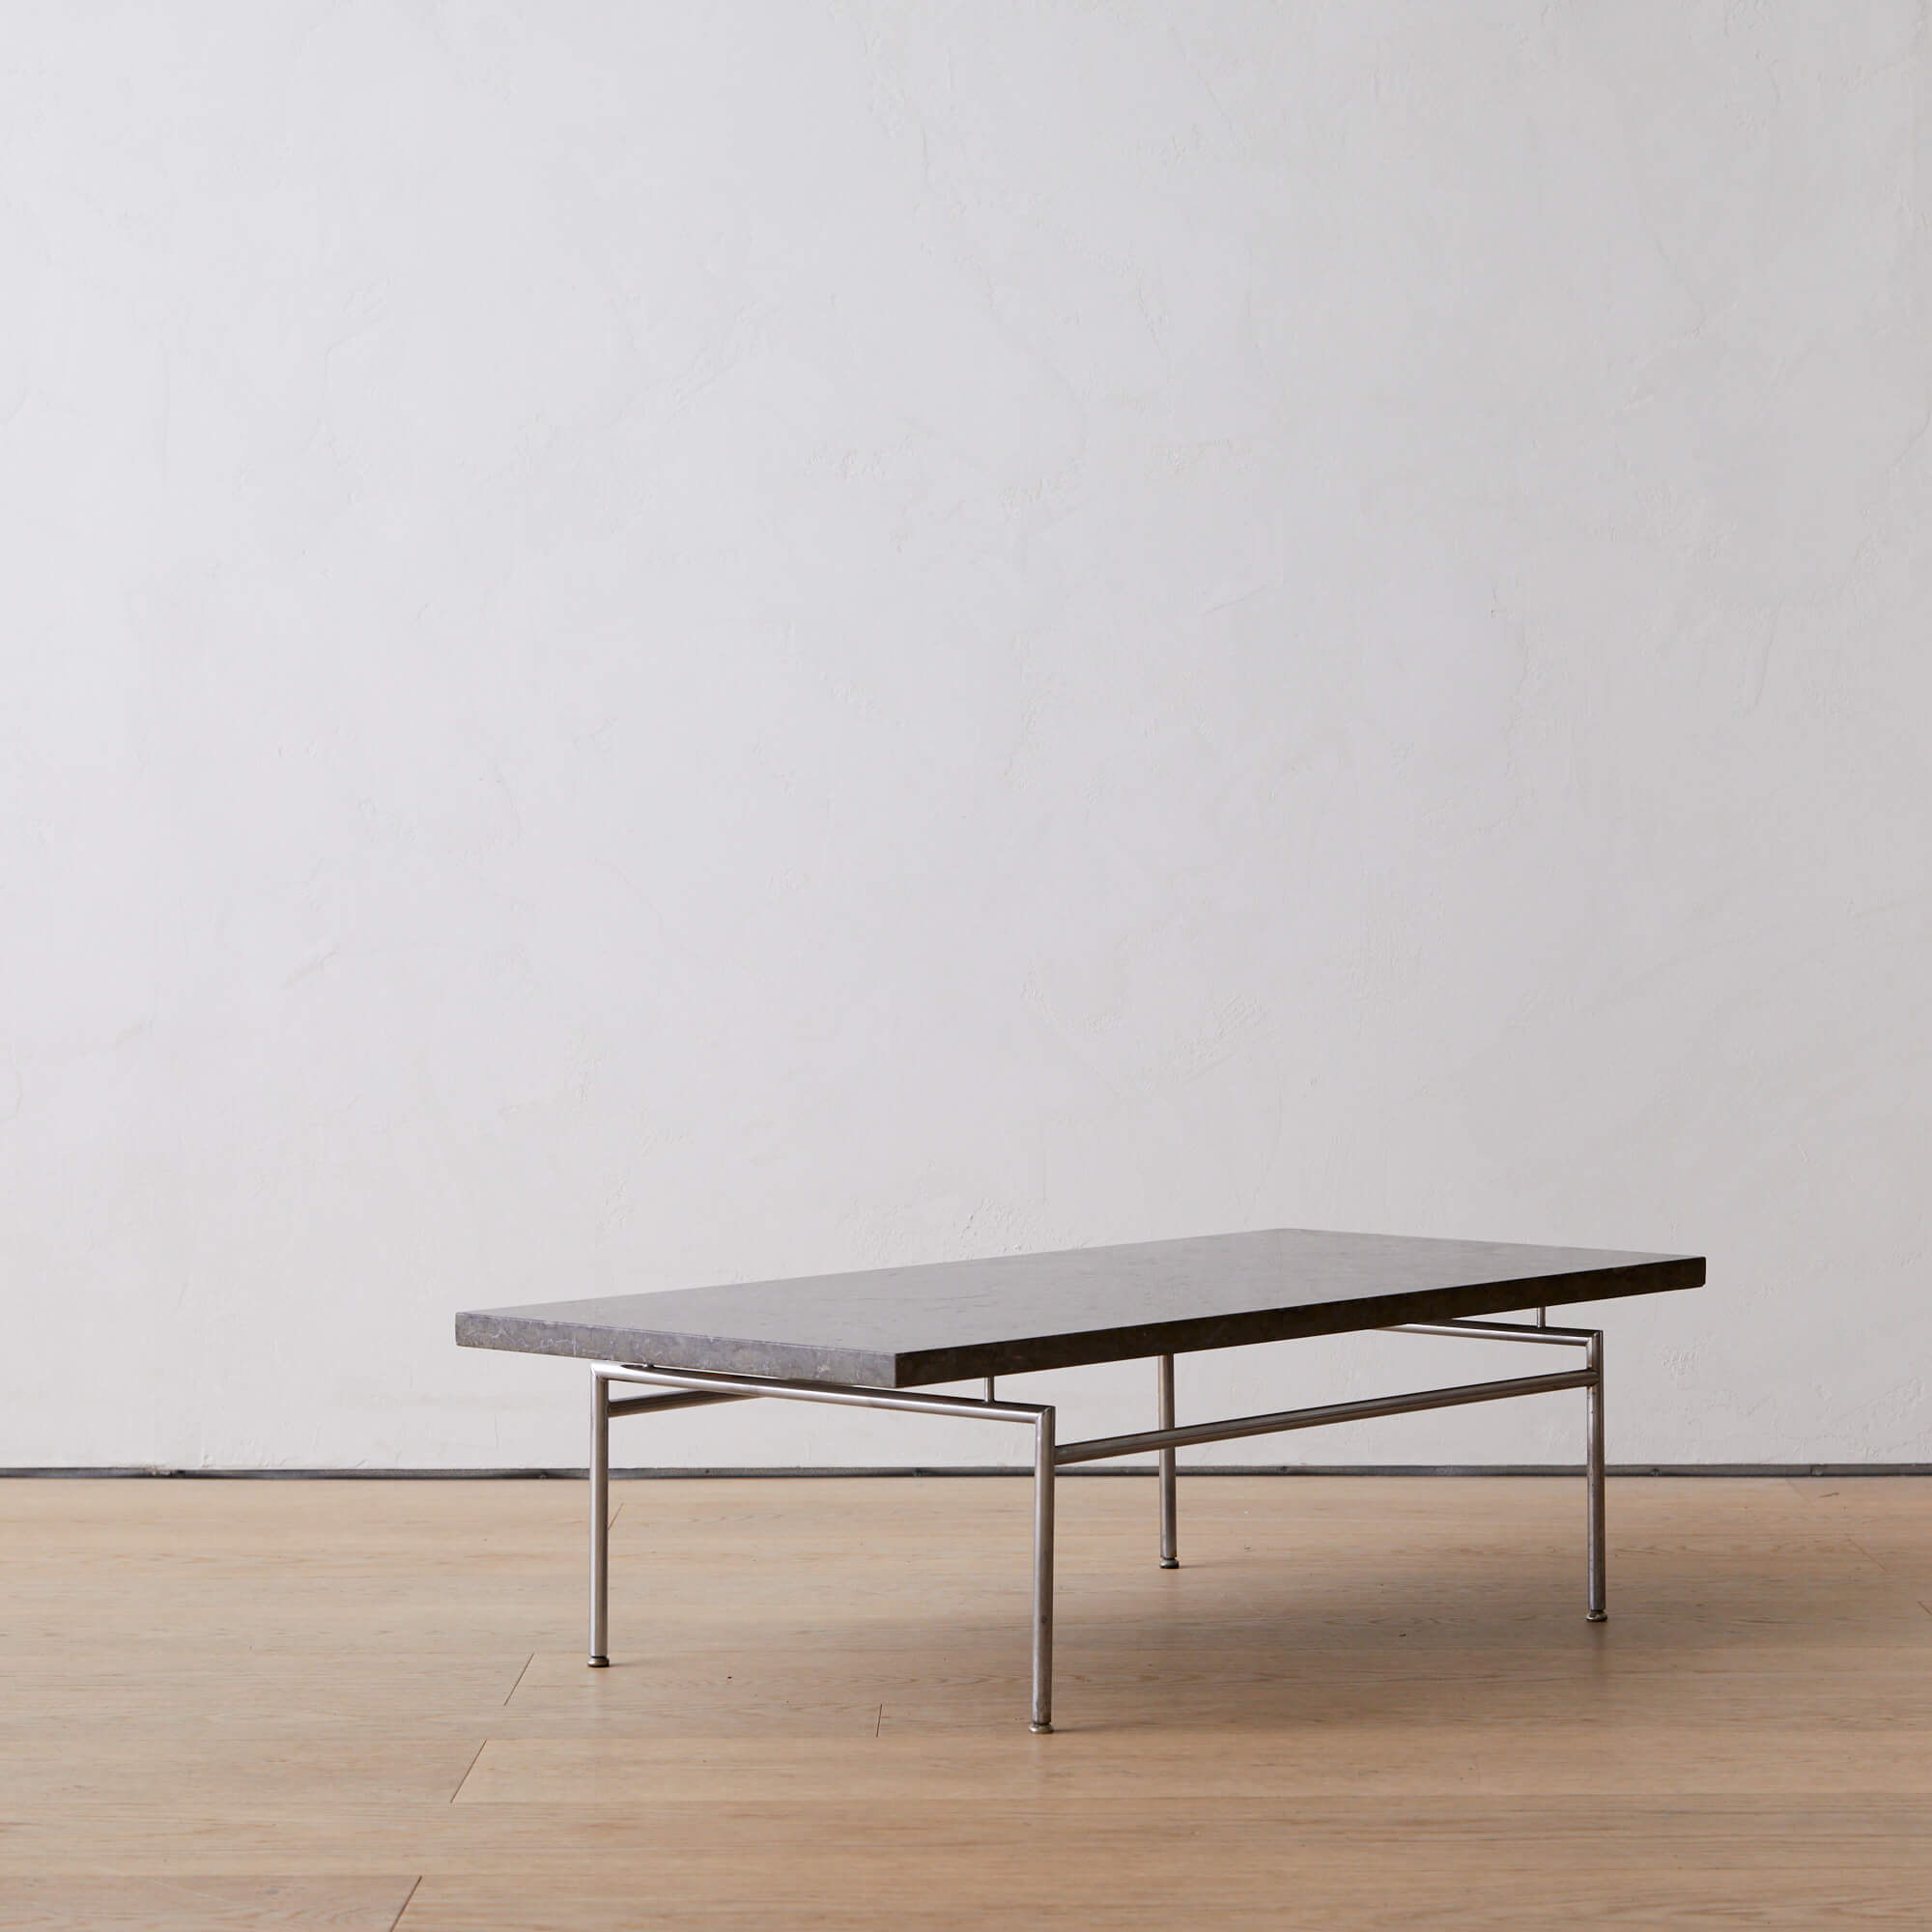 Low coffee table by Poul Norreklit with Öland stone top